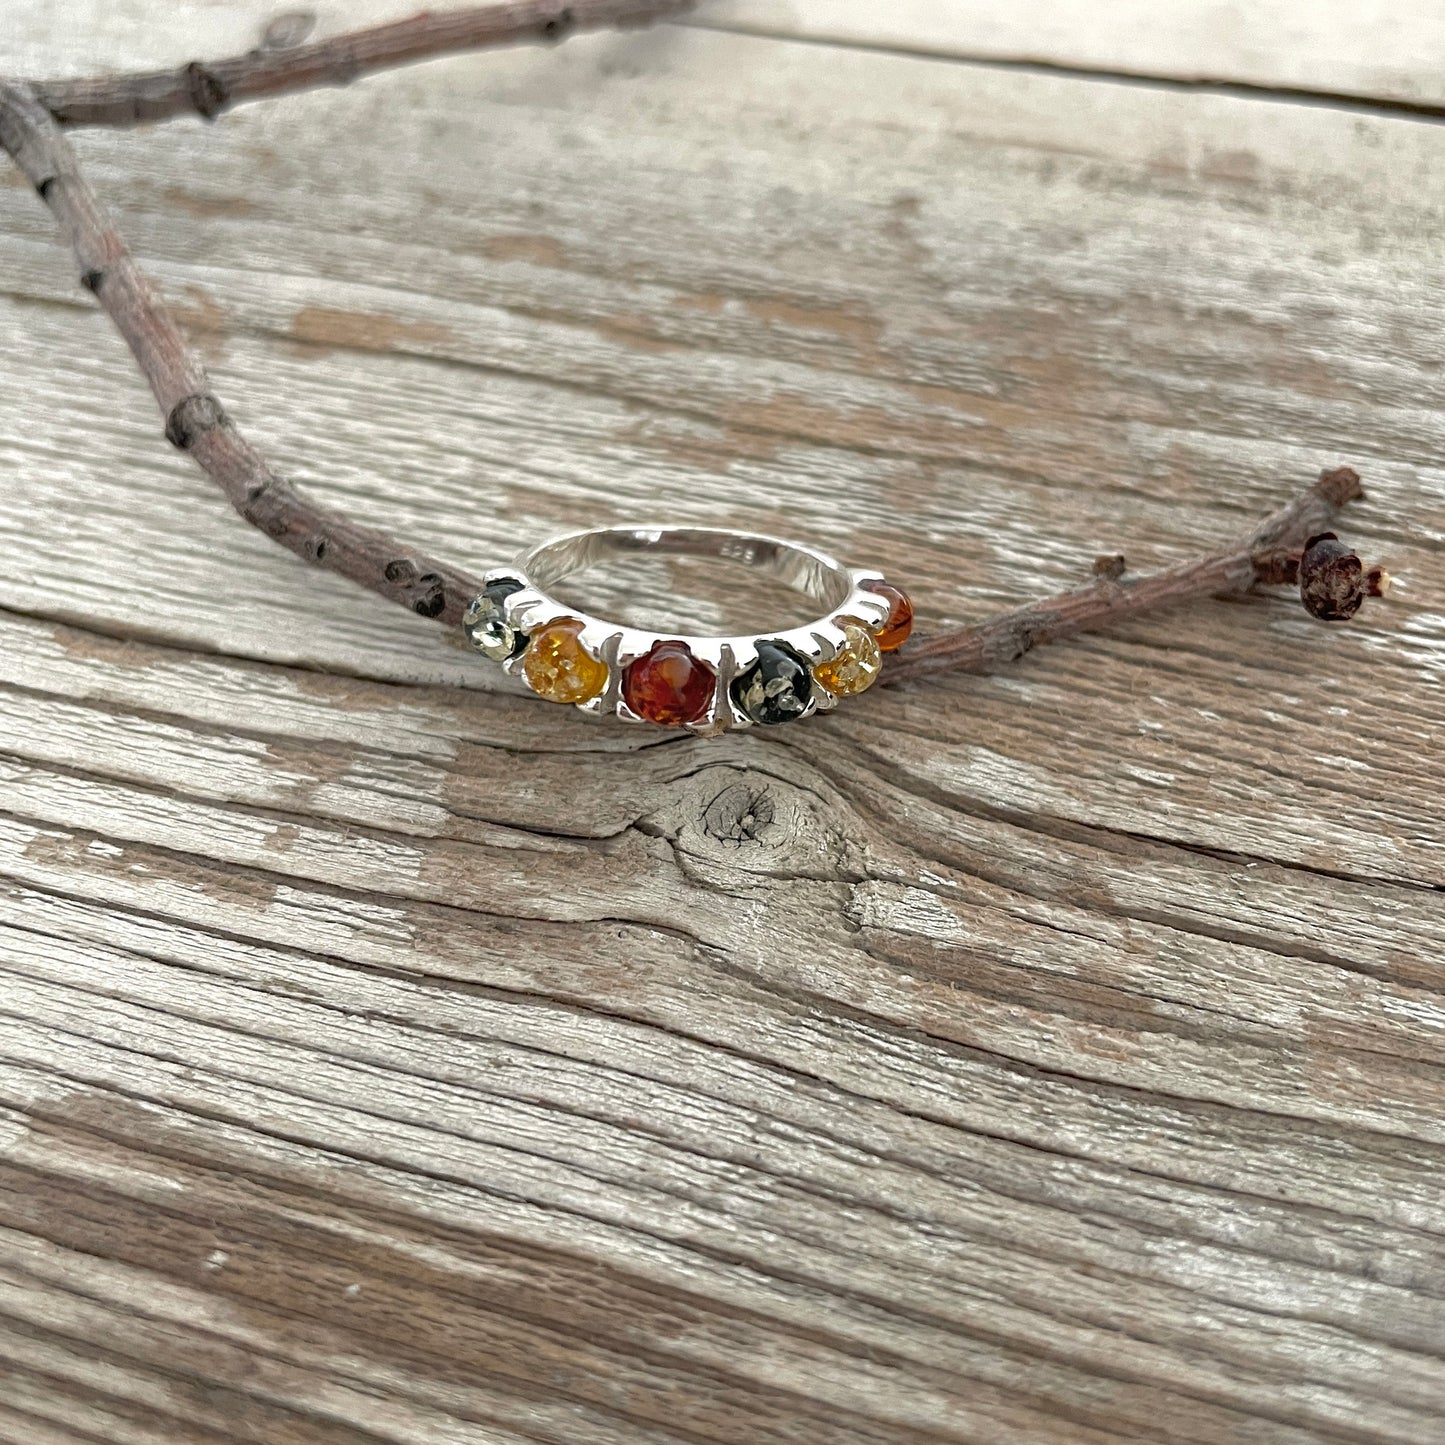 green, yellow and cognac amber round stones set in a sterling silver band